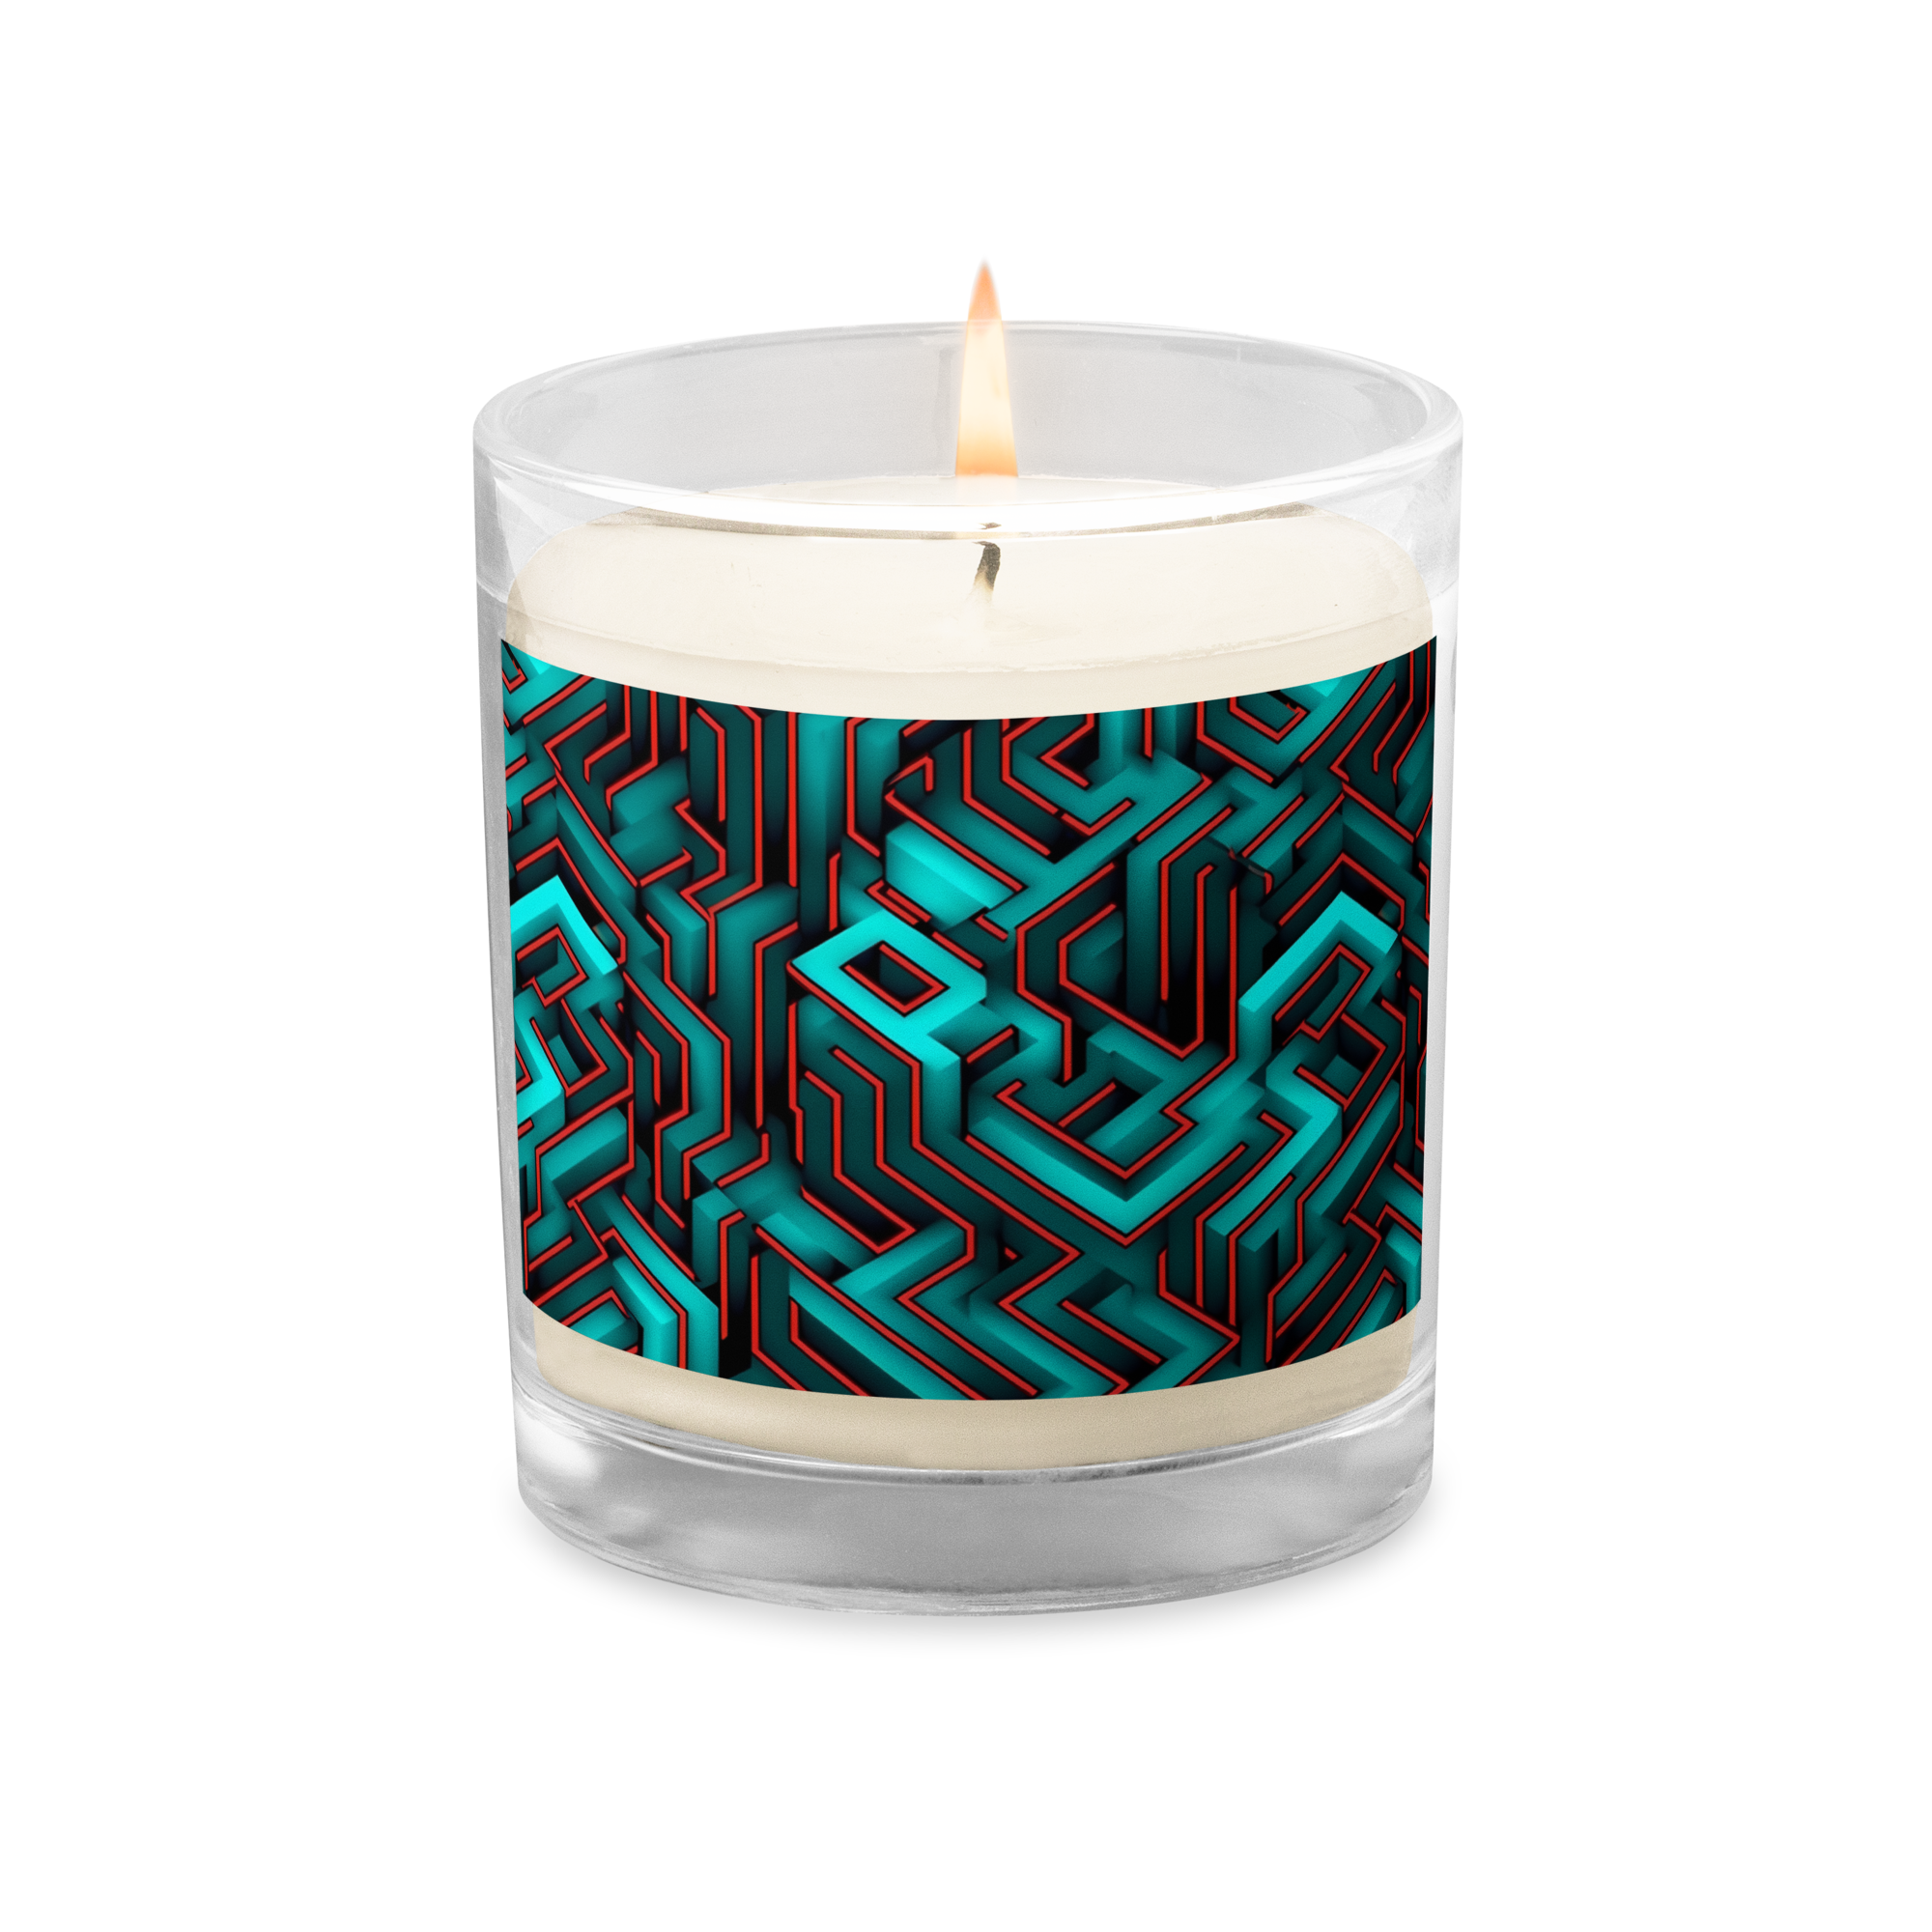 3D Maze Illusion | 3D Patterns | Glass Jar Soy Wax Candle - #2